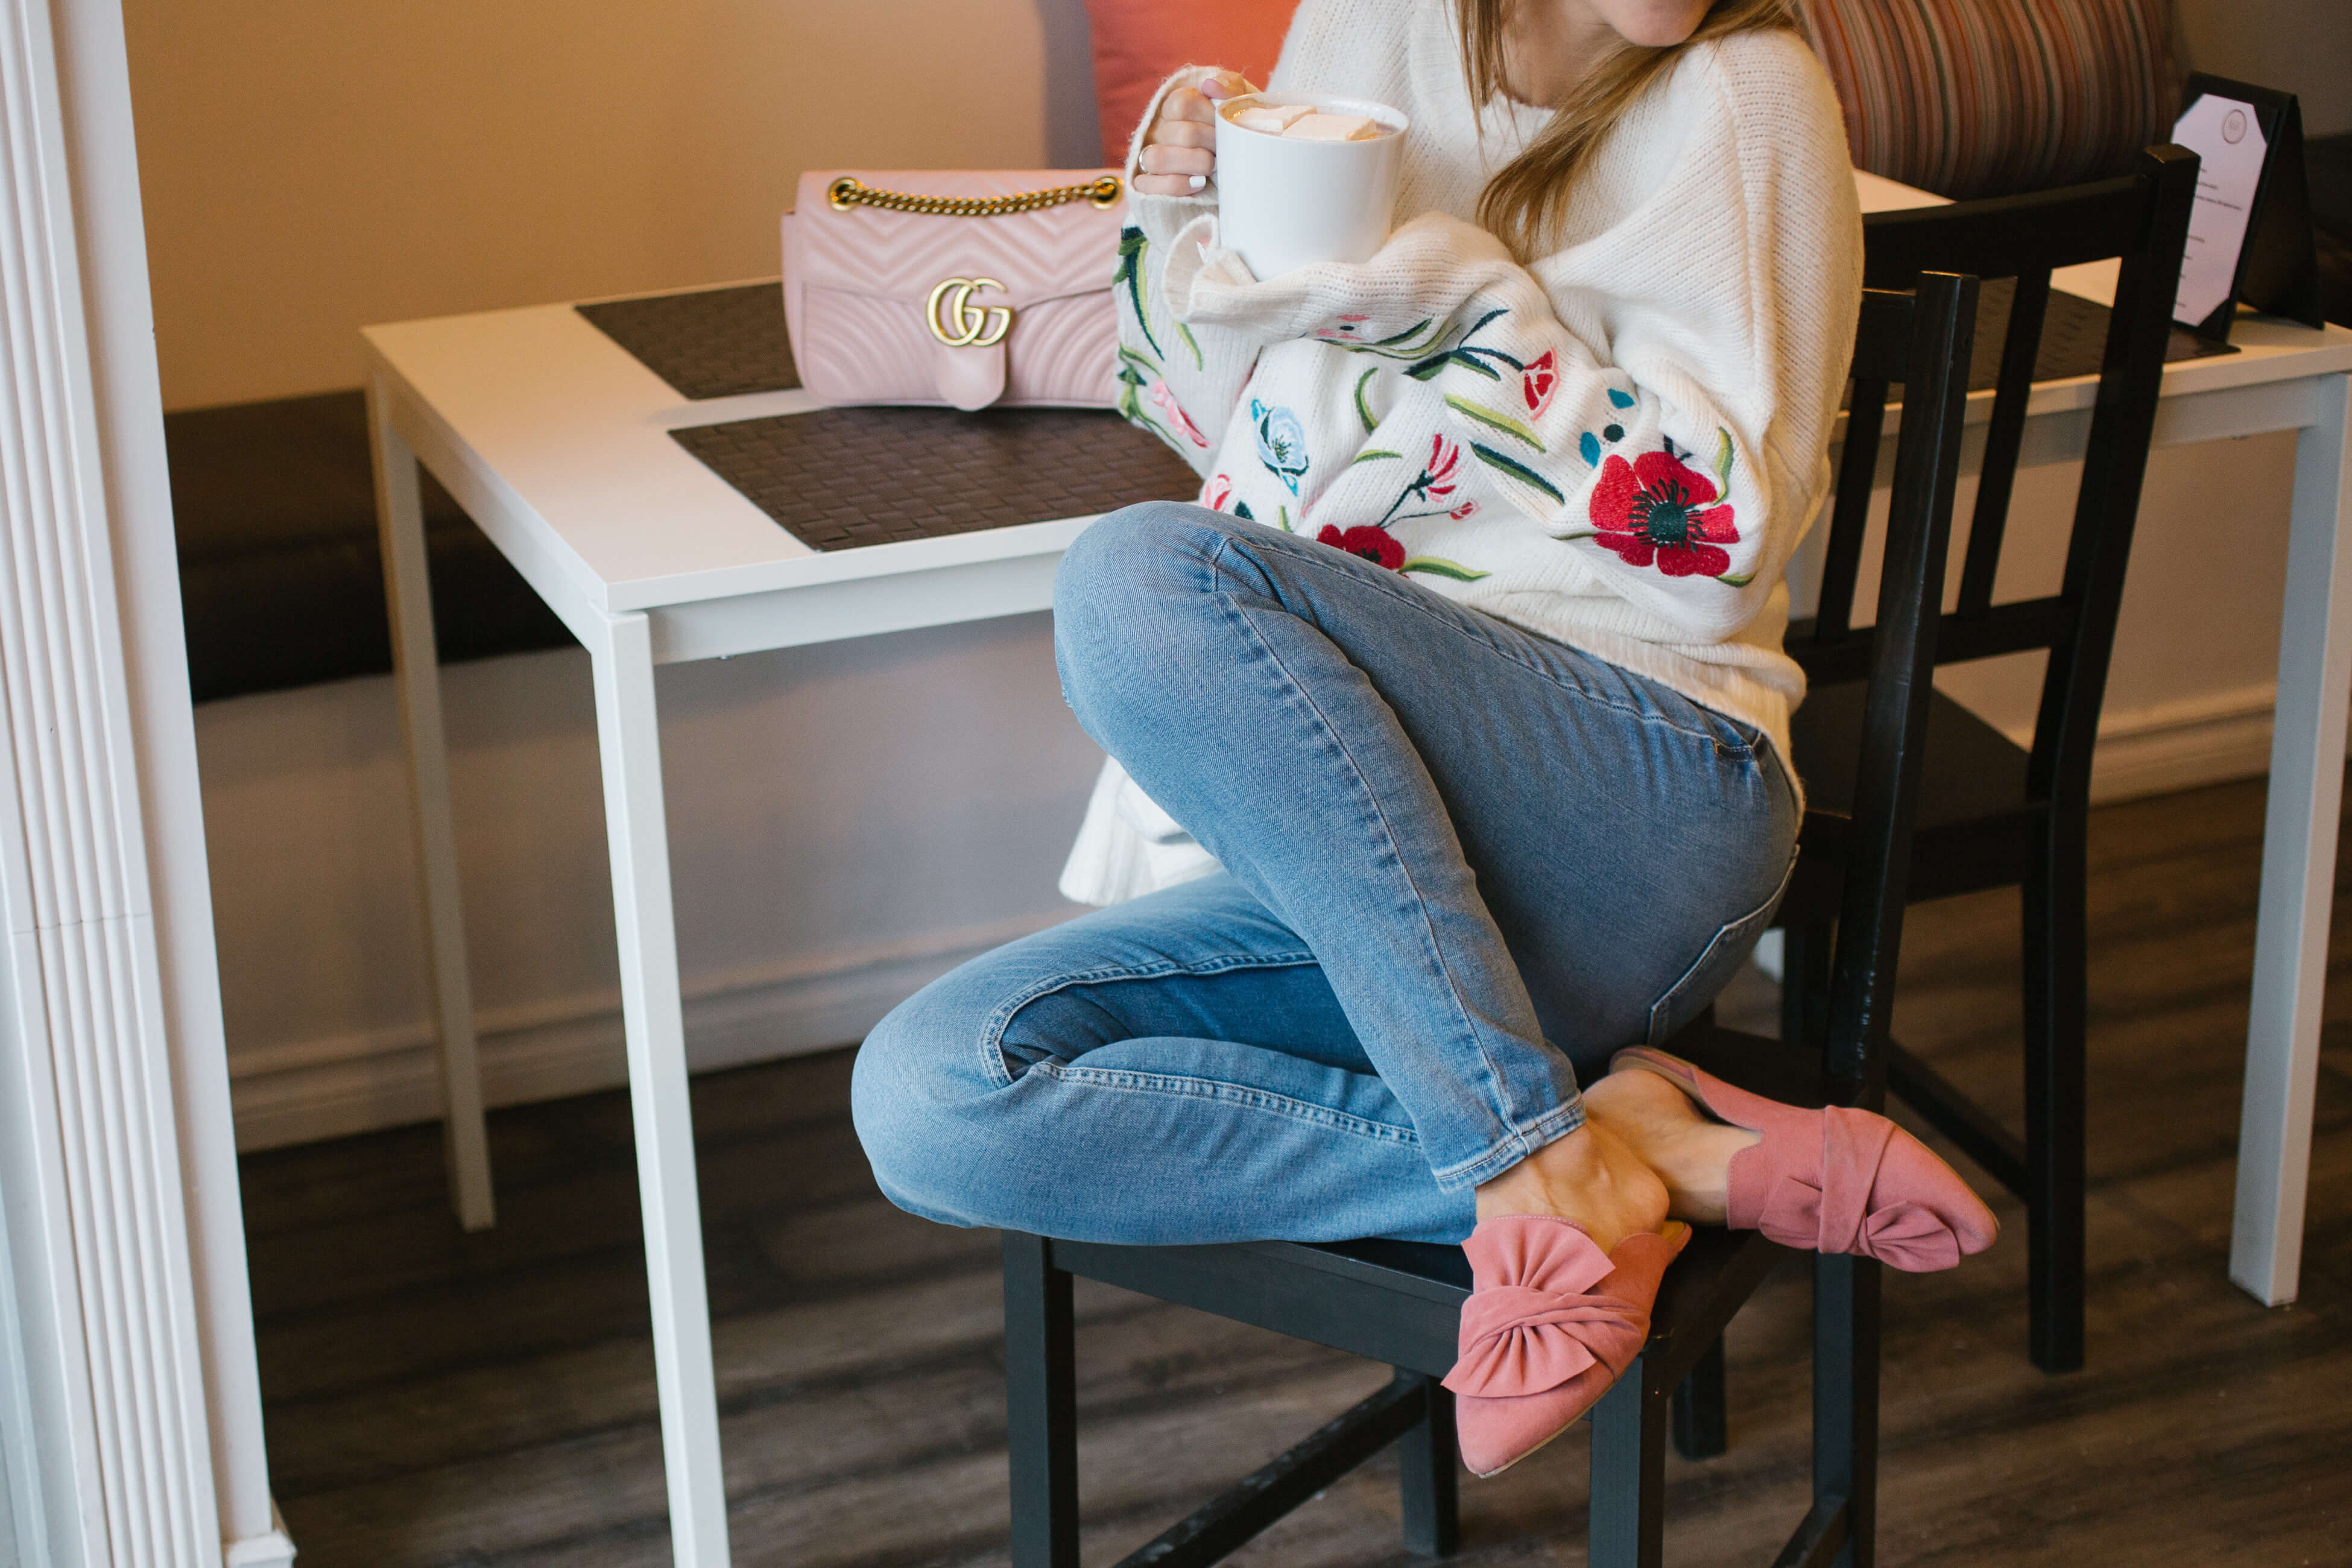 Guess Floral embroidered sweater, guess Low-rise skinny jeans, pink bow slides, pink Gucci Marmount bag sparkleshinylove spring style, M&R Cakes and Cafe